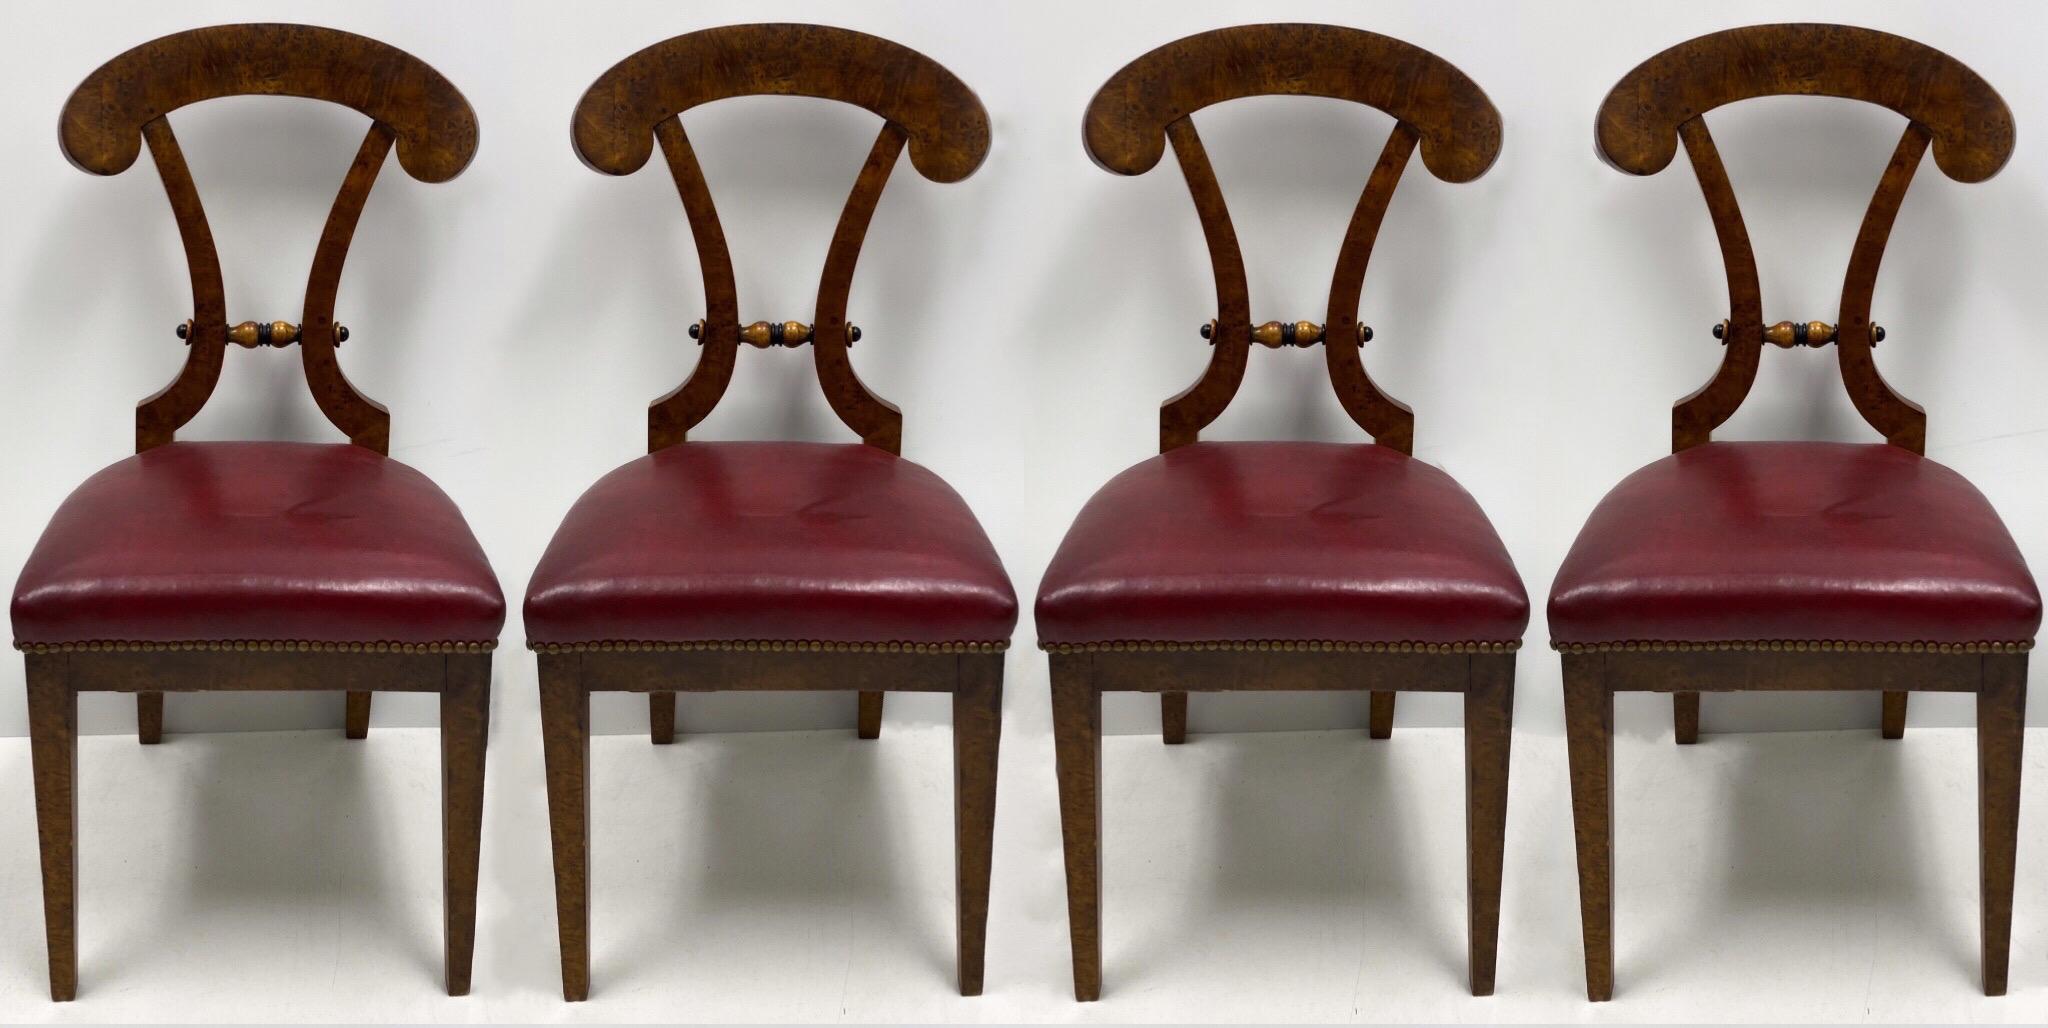 Art Deco Biedermeier Burlwood and Leather Chairs, Set of 4 For Sale 3